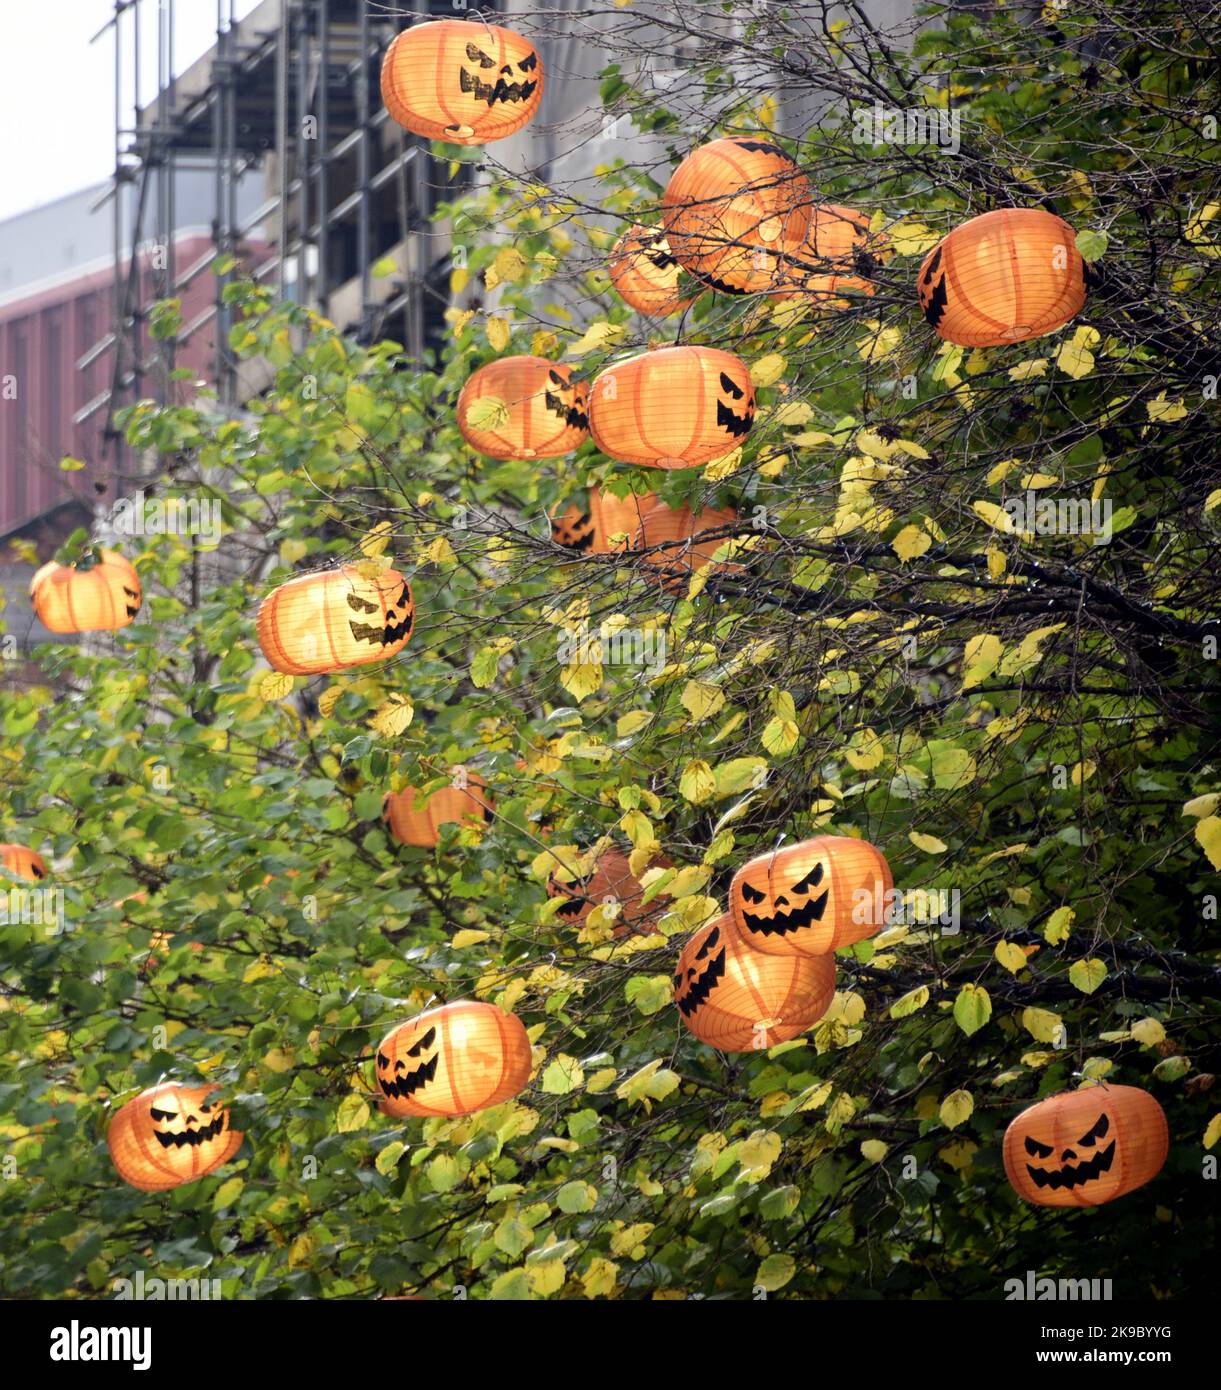 Manchester, UK. 27th October, 2022. Paper pumpkins decorate trees in the city centre. Halloween decorations appear in city centre Manchester, England, United Kingdom, ready for the  celebration of Halloween or Hallowe'en, as observed in many countries on 31 October, the eve of the Western Christian feast of All Hallows' Day. The festival begins the observance of Allhallowtide,a time to remember the dead, including saints or hallows and all the departed. Credit: Terry Waller/Alamy Live News Stock Photo